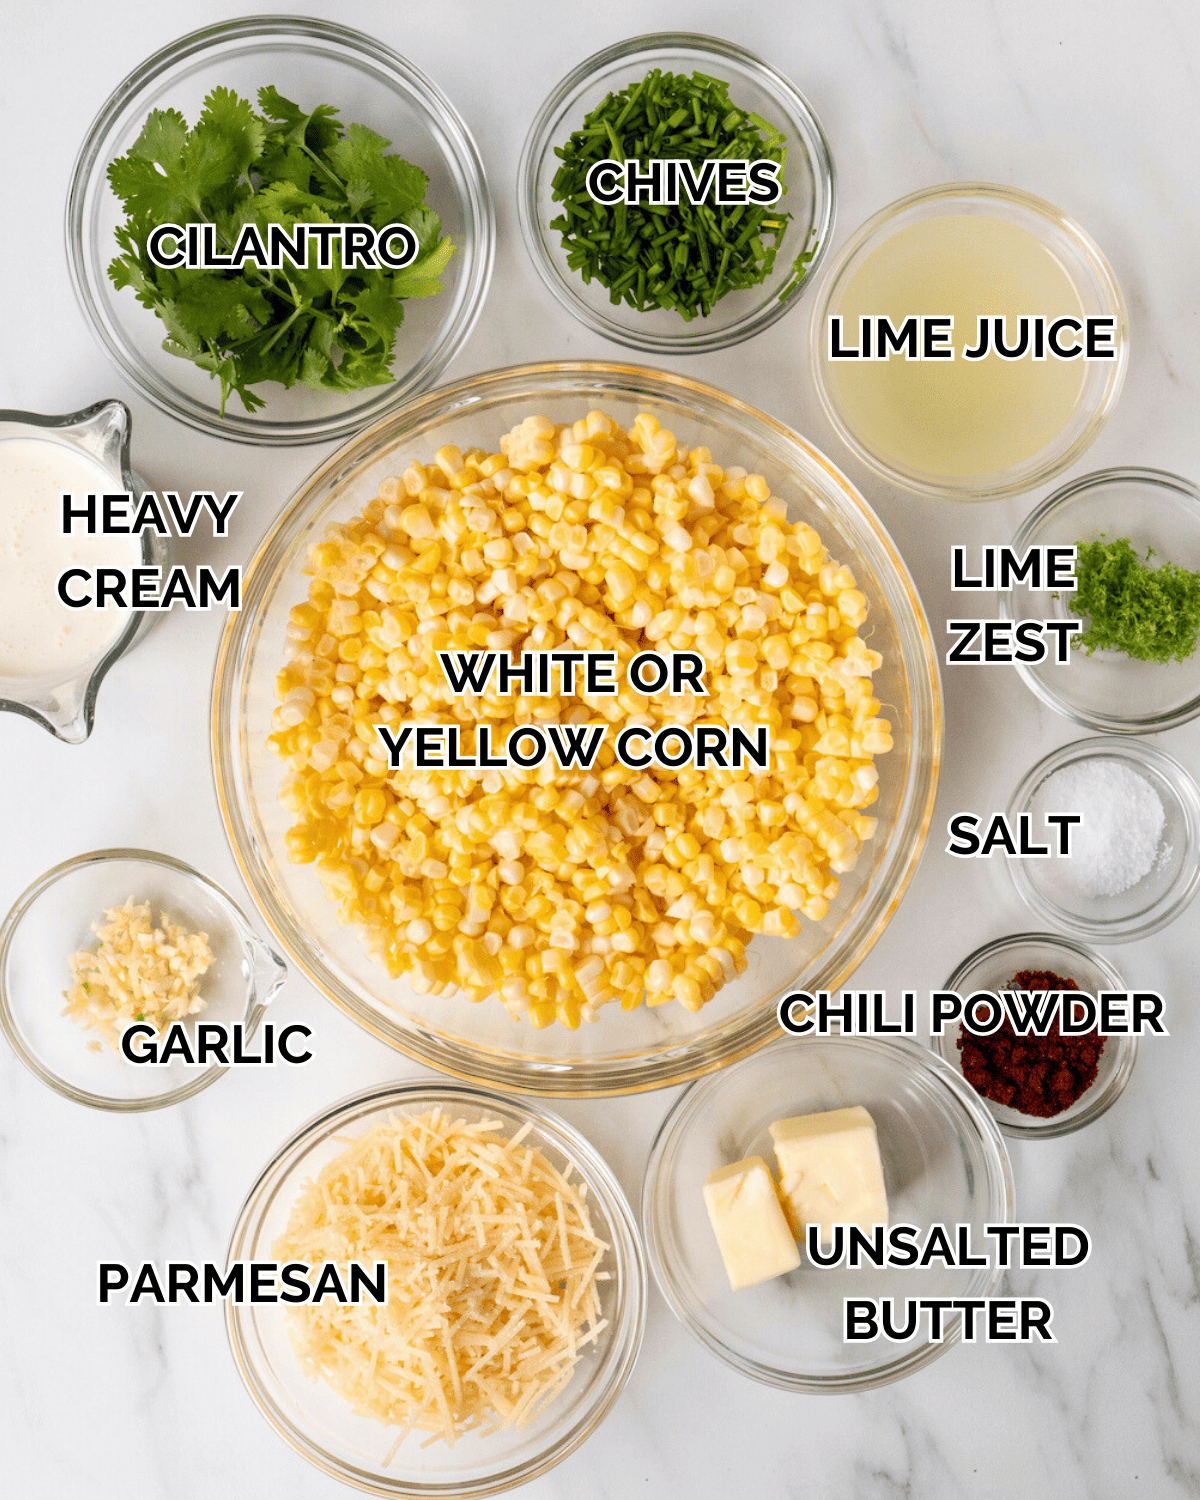 An overhead shot of all the ingredients in prep bowls. Ingredients consists of cilantro, chives, lime juice, heavy cream, white corn, lime zest, garlic, parmesan, unsalted butter, chili powder, and salt.  